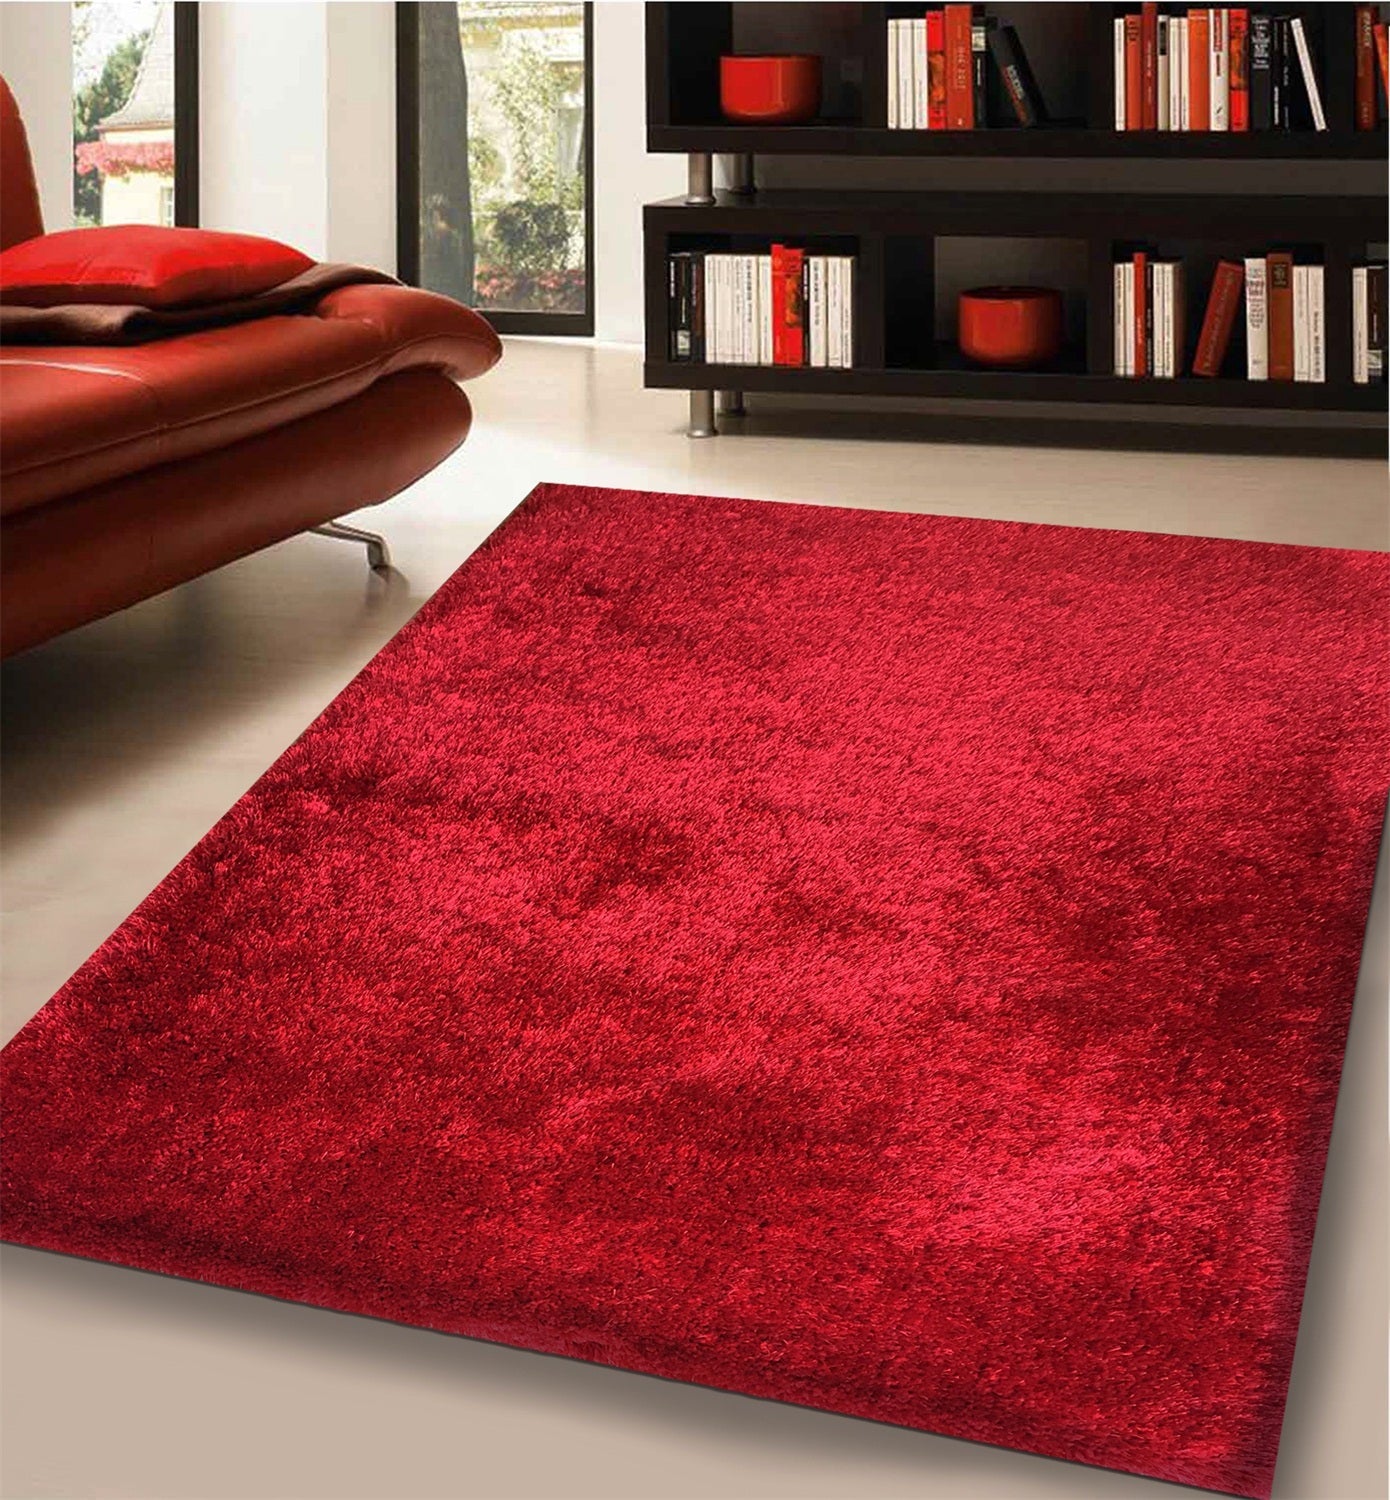 Durable Hand Tufted Multi-textural Solid Designer Shag S.V.S. Area Rug by Rug Factory Plus - Rug Factory Plus